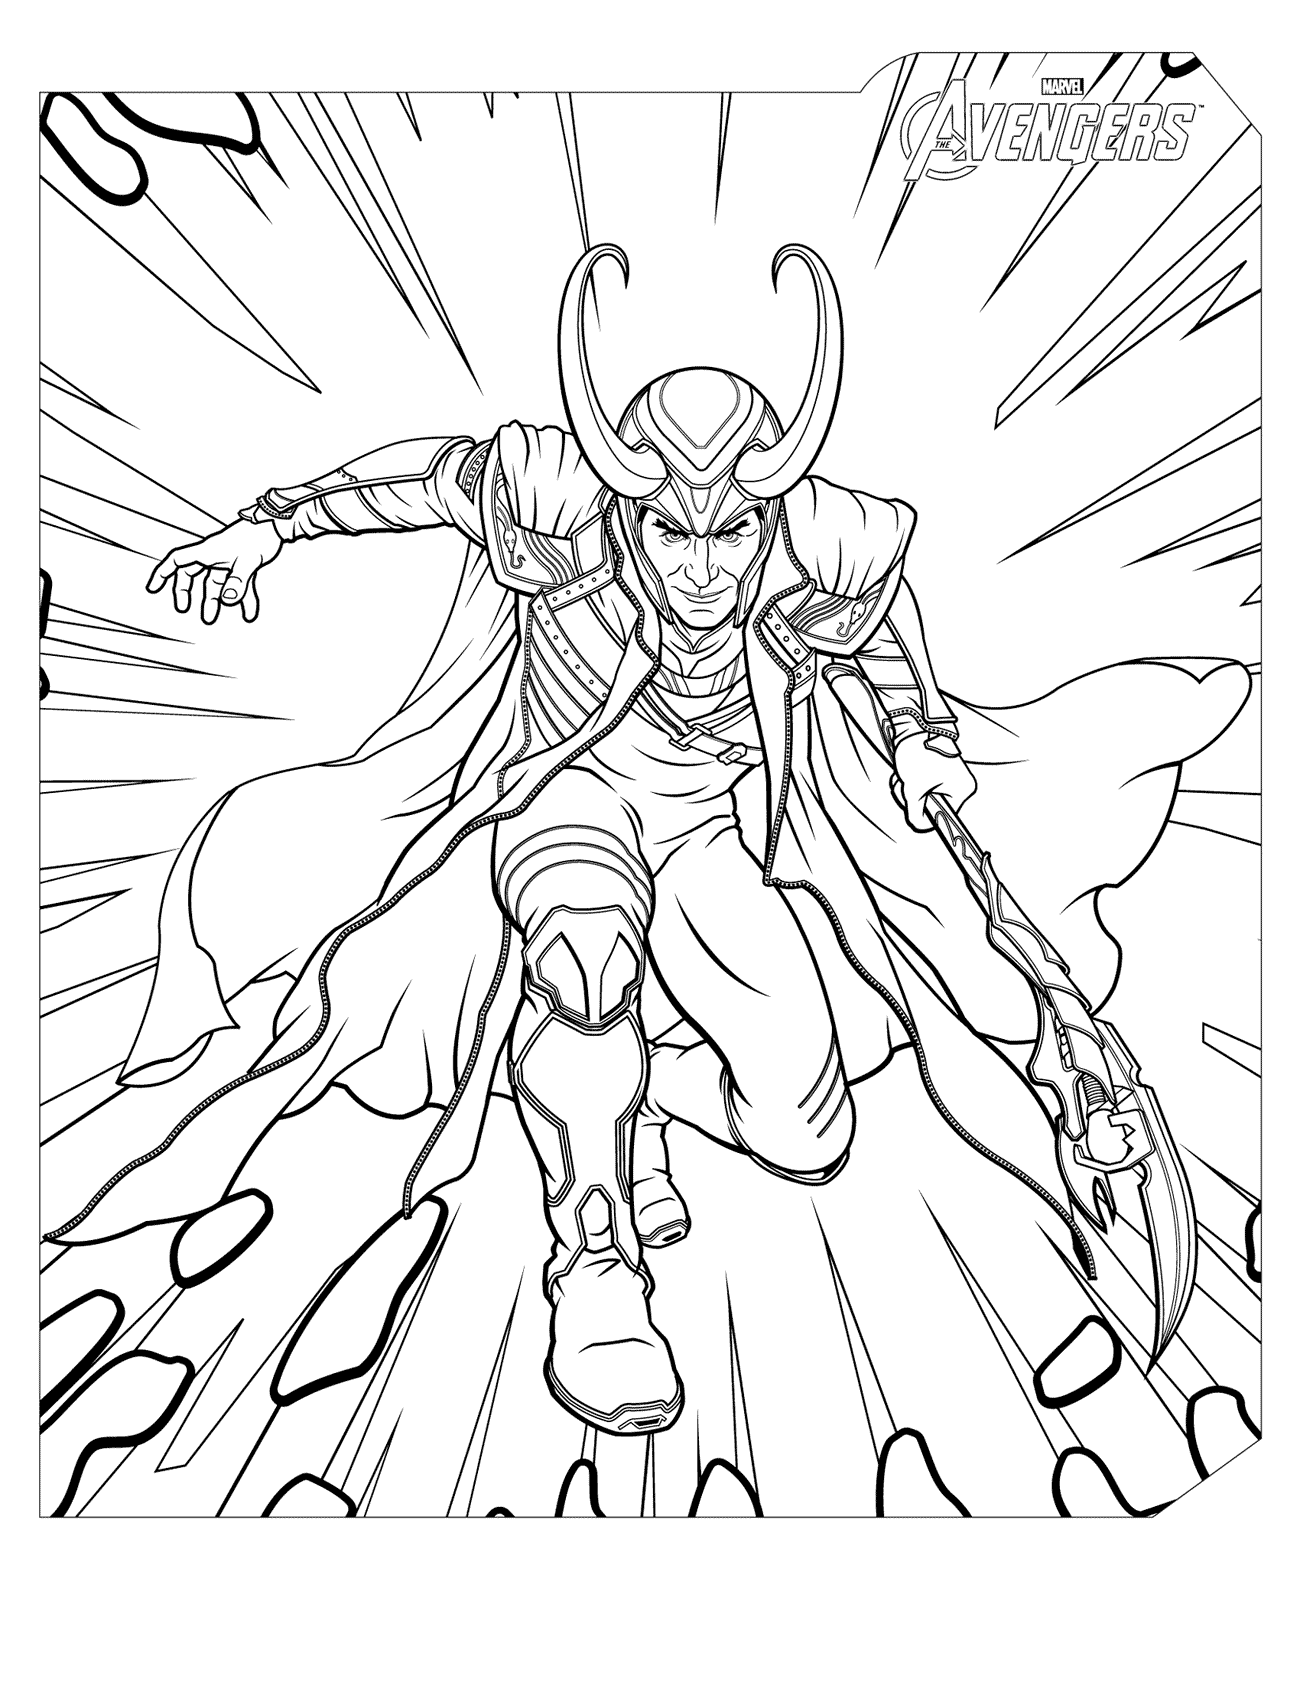 Coloring page - The younger brother of Thor